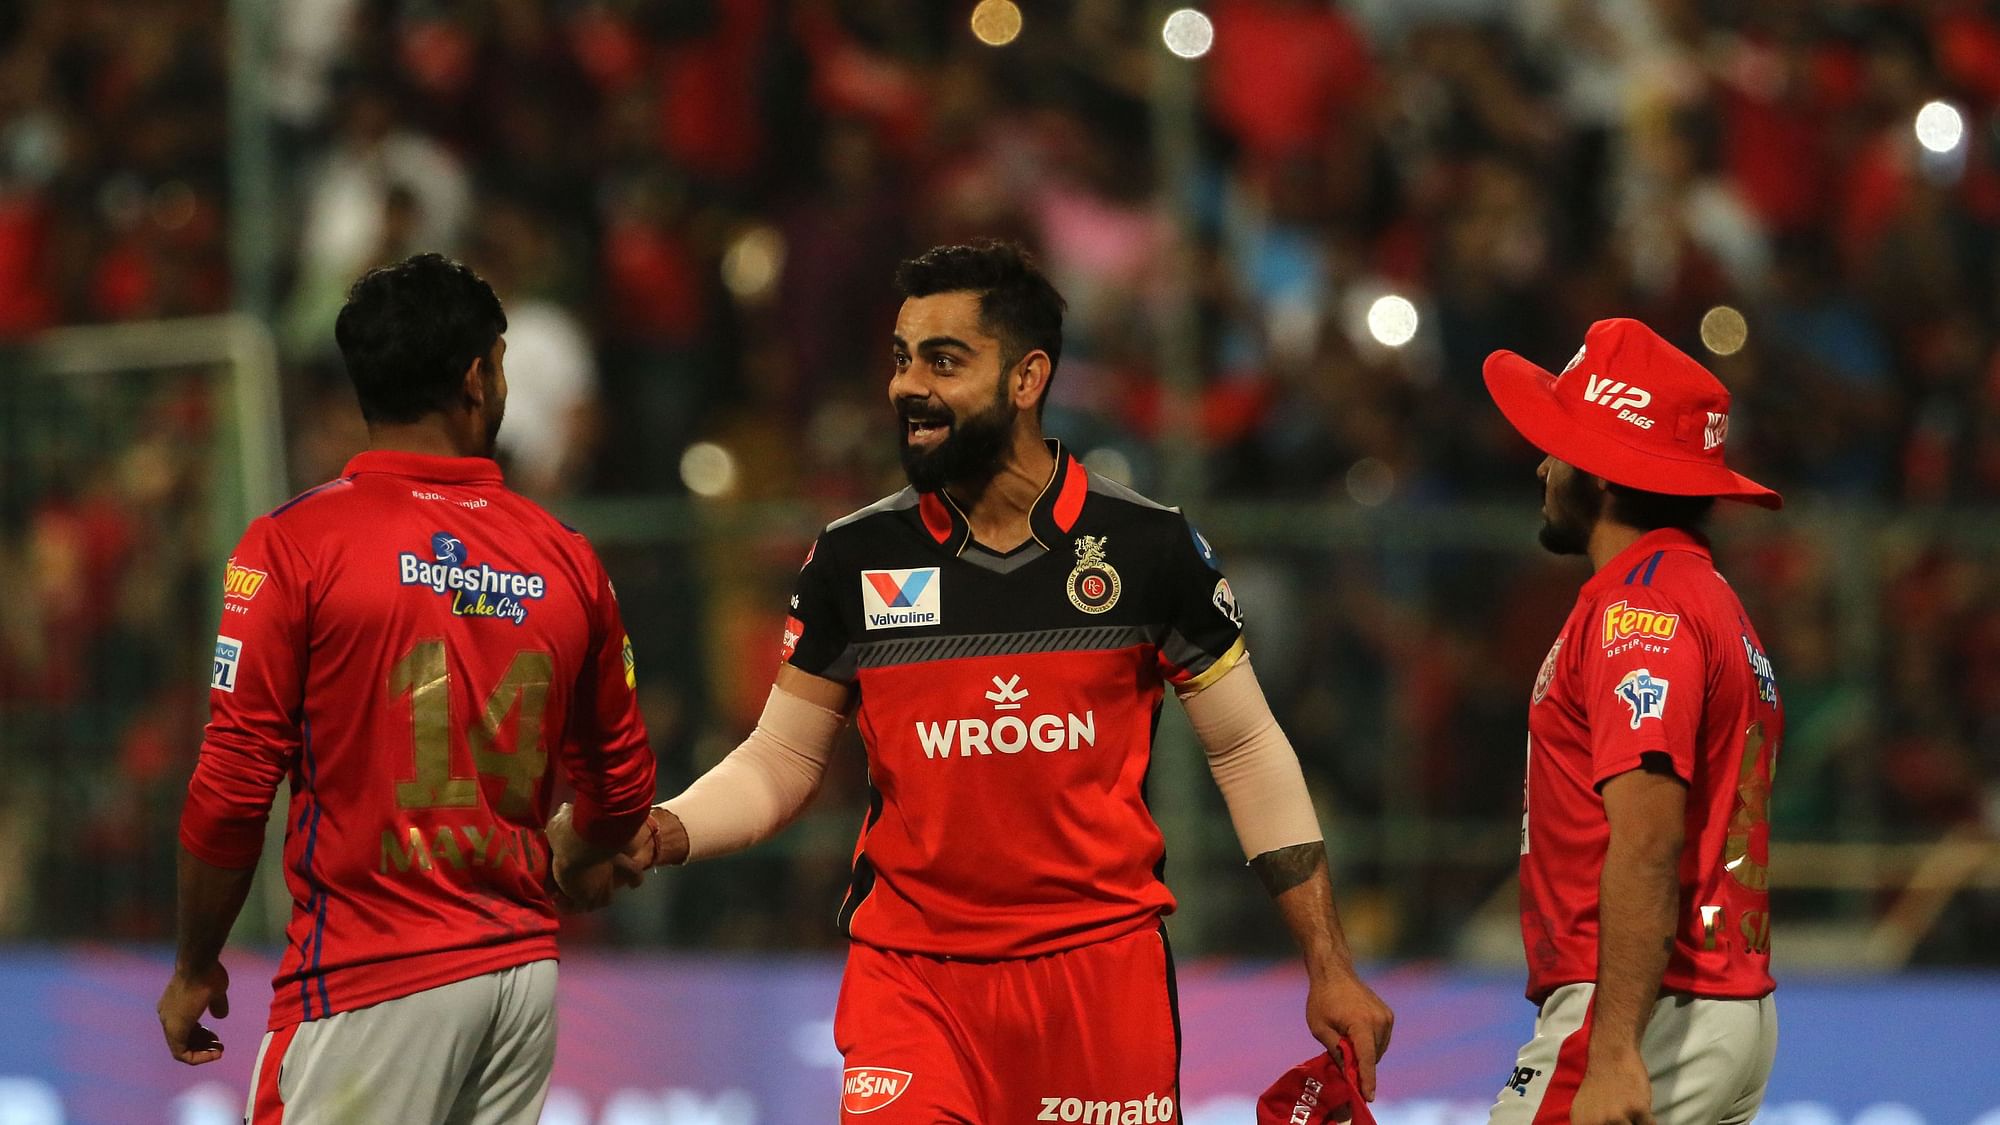 Royal Challengers Bangalore beat Kings XI Punjab by 17 runs for their third straight victory.